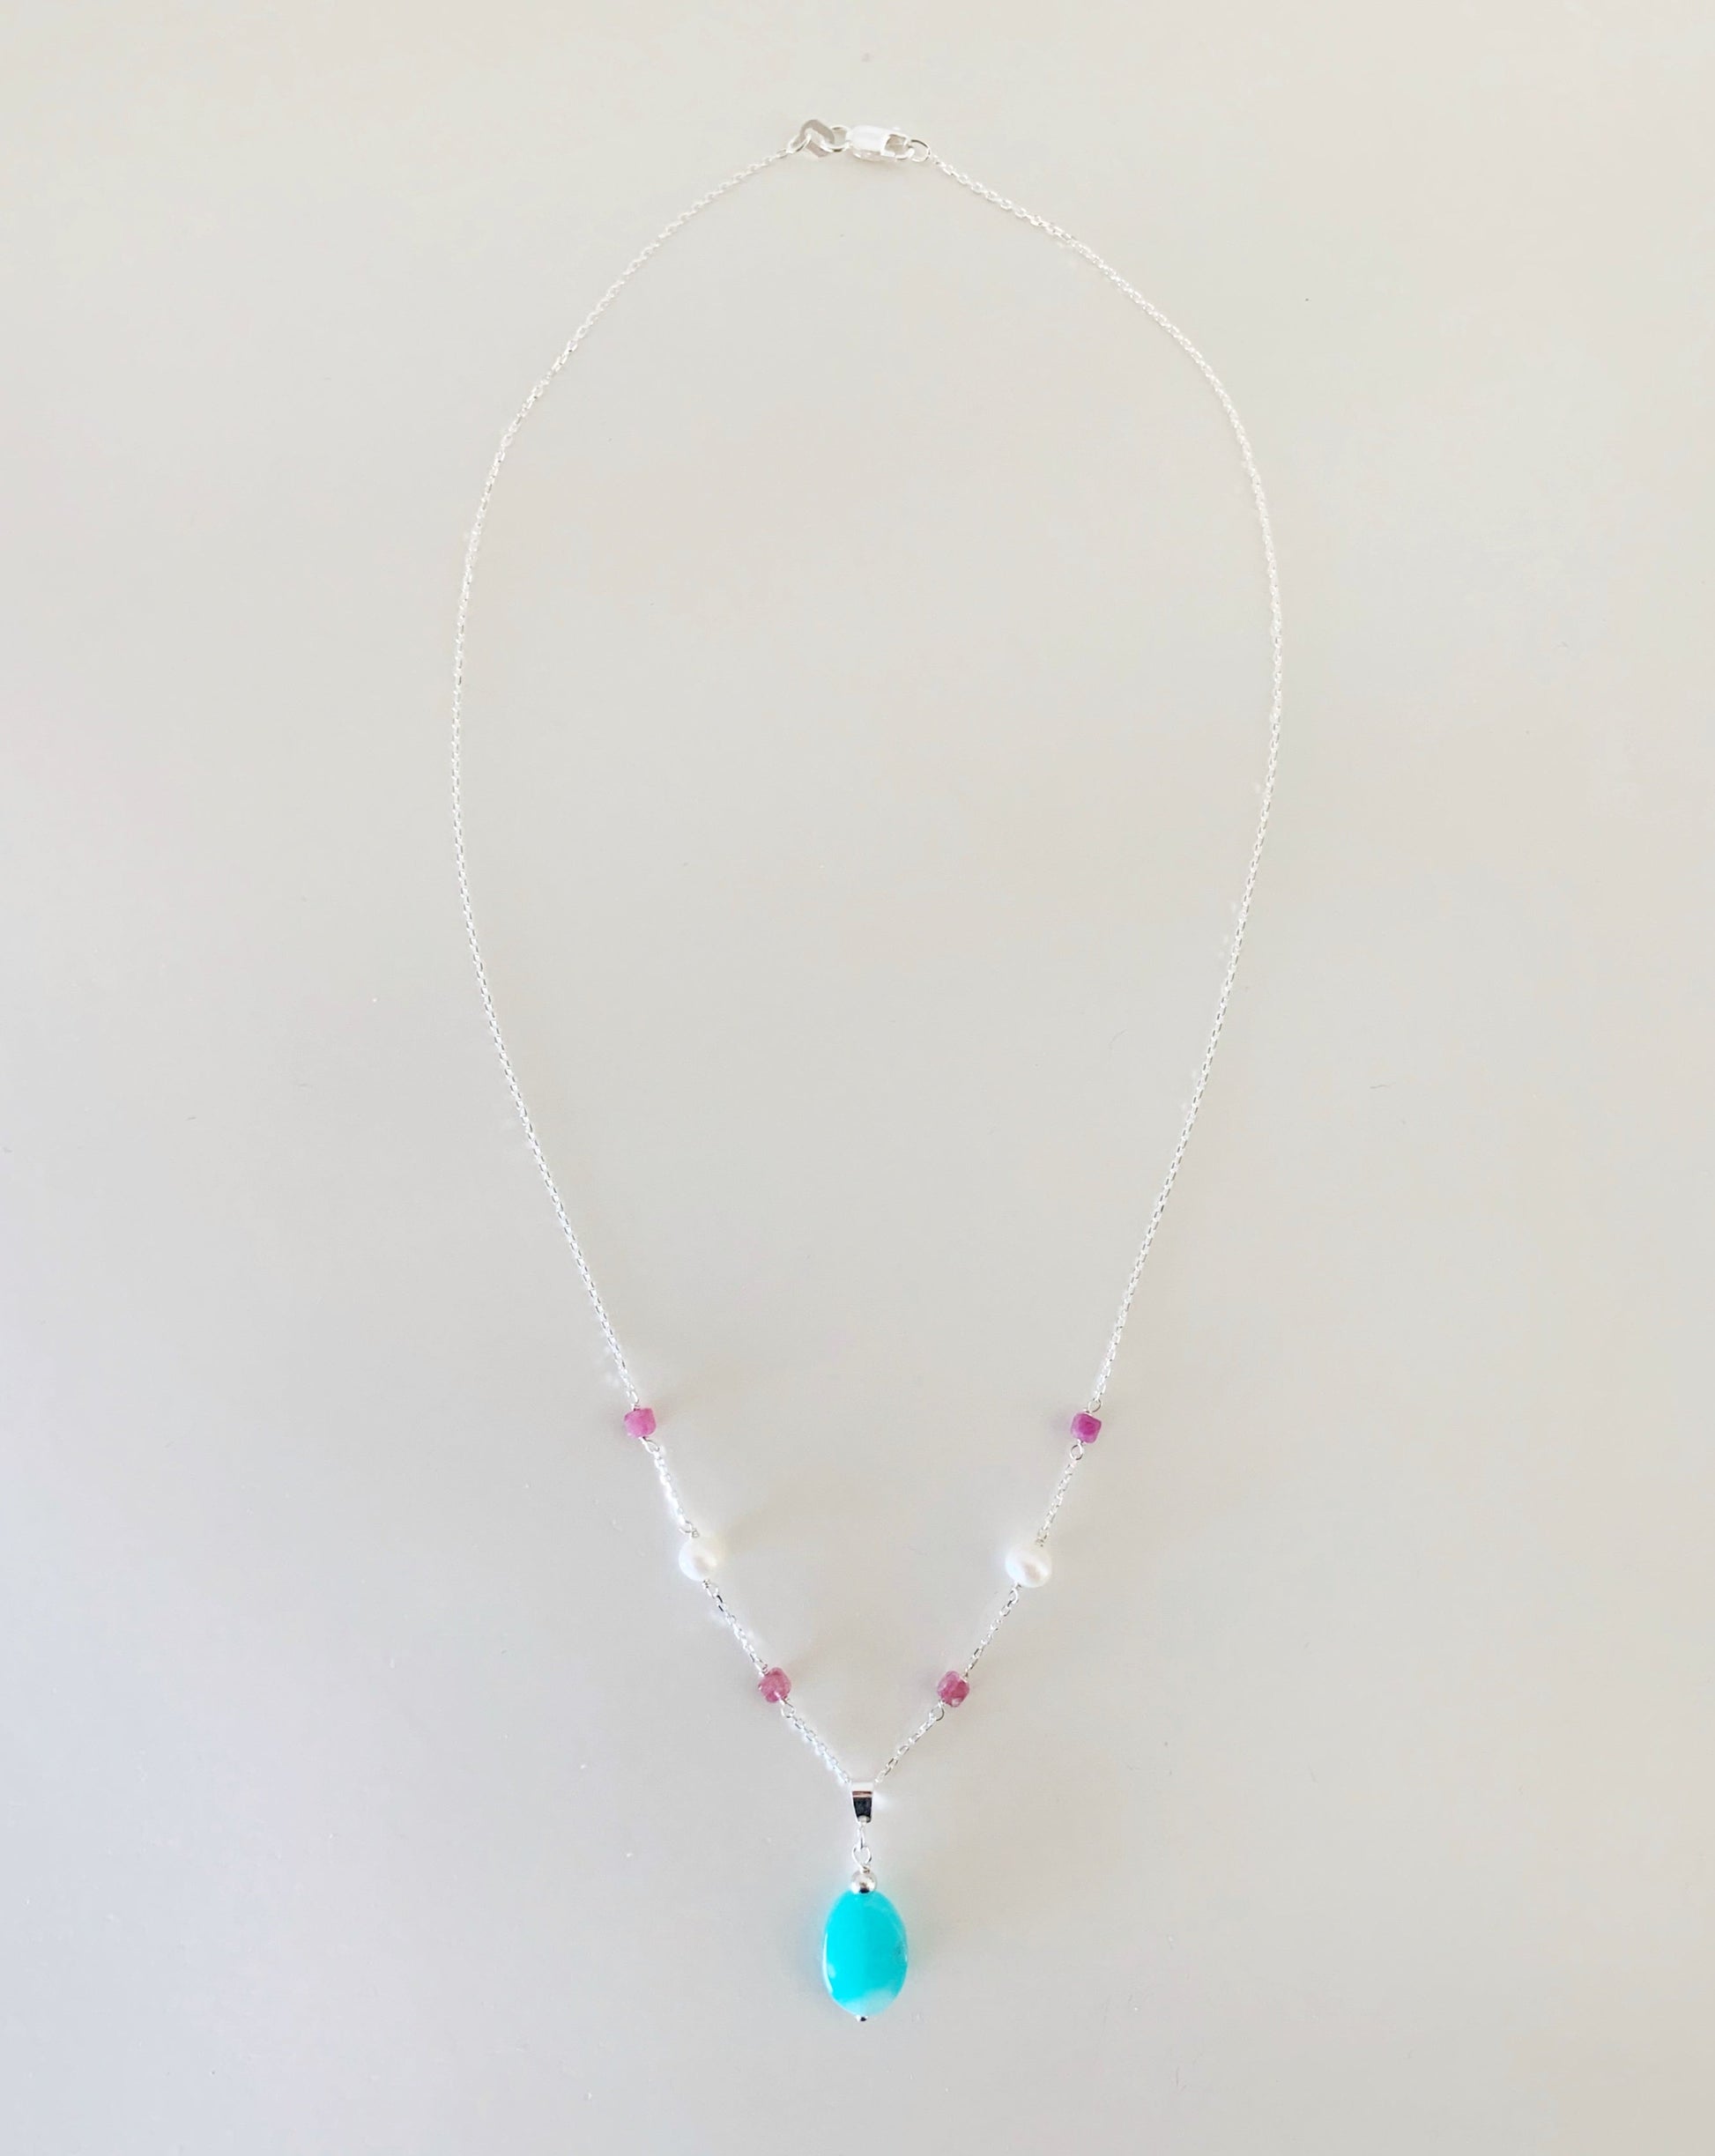 the harwich port necklace by mermaids and madeleiens is a pendant style necklace with amazonite suspended from sterling silver with pink tourmaline and freshwater pearls this necklace is full length view and photographed on a white surface